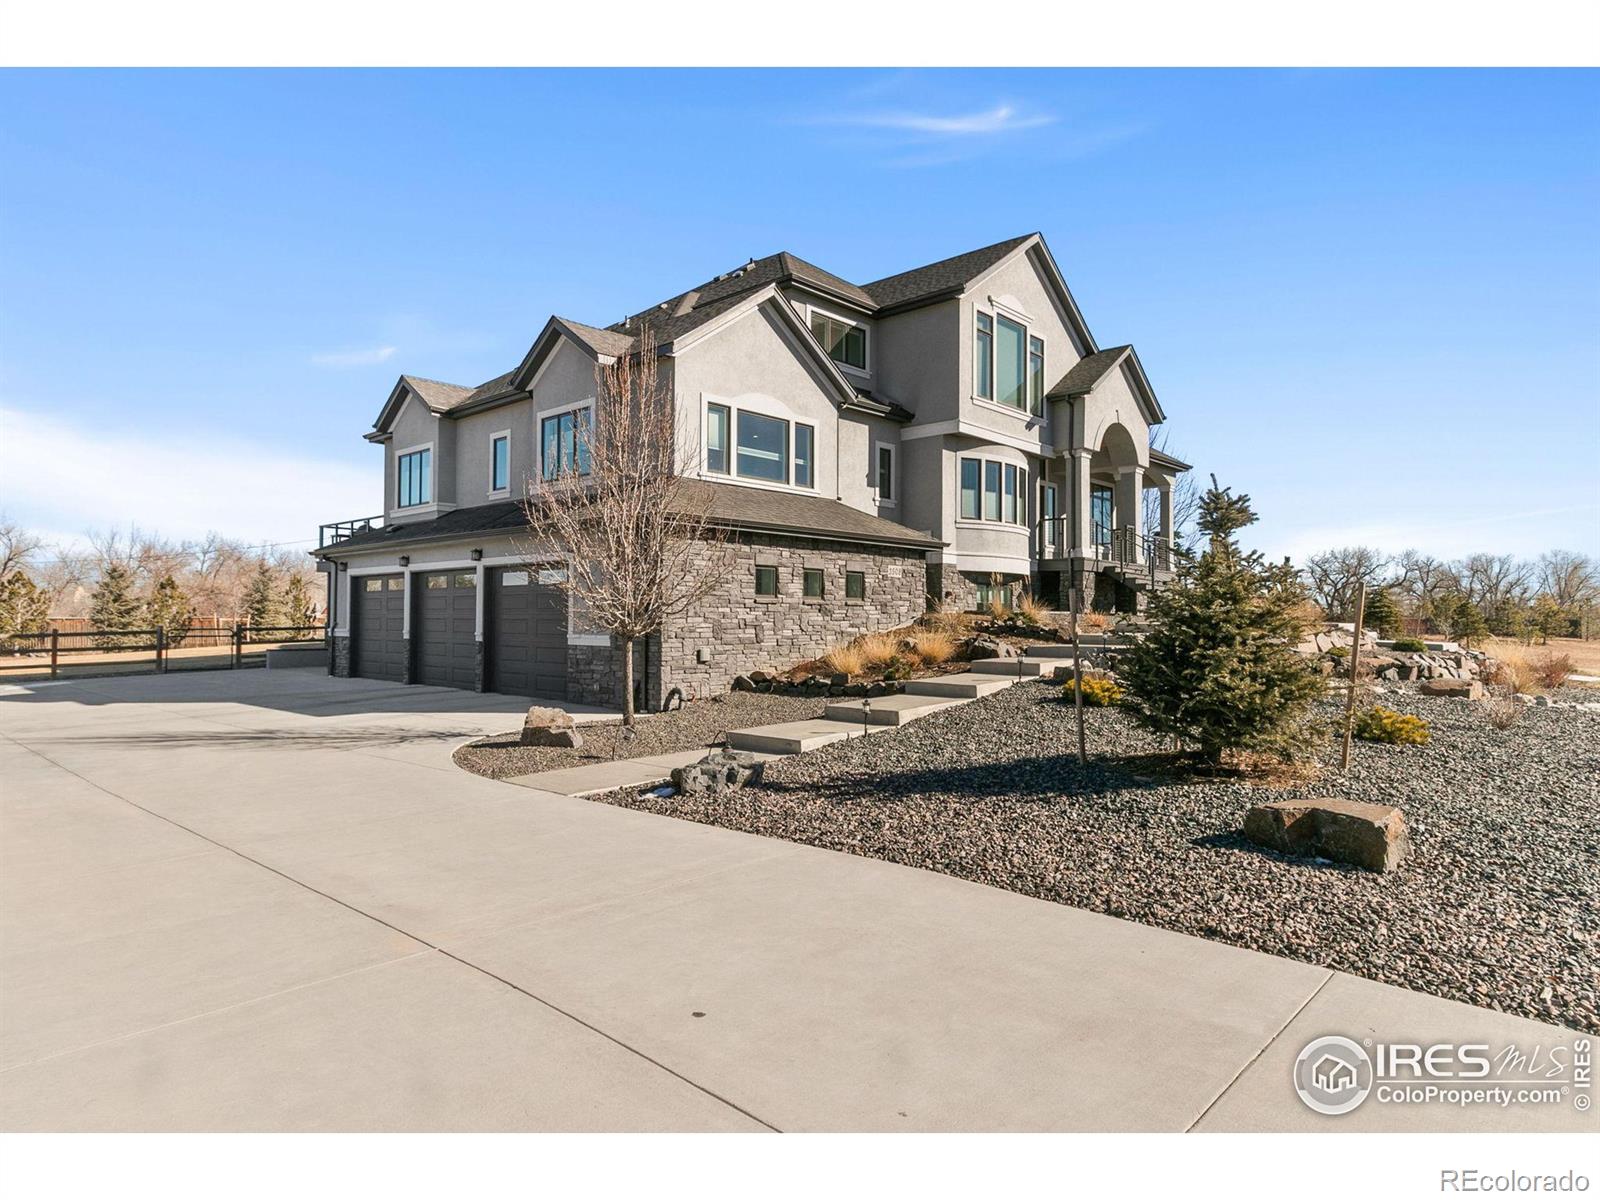 3508  Hearthfire Drive, fort collins MLS: 4567891002523 Beds: 7 Baths: 7 Price: $1,700,000